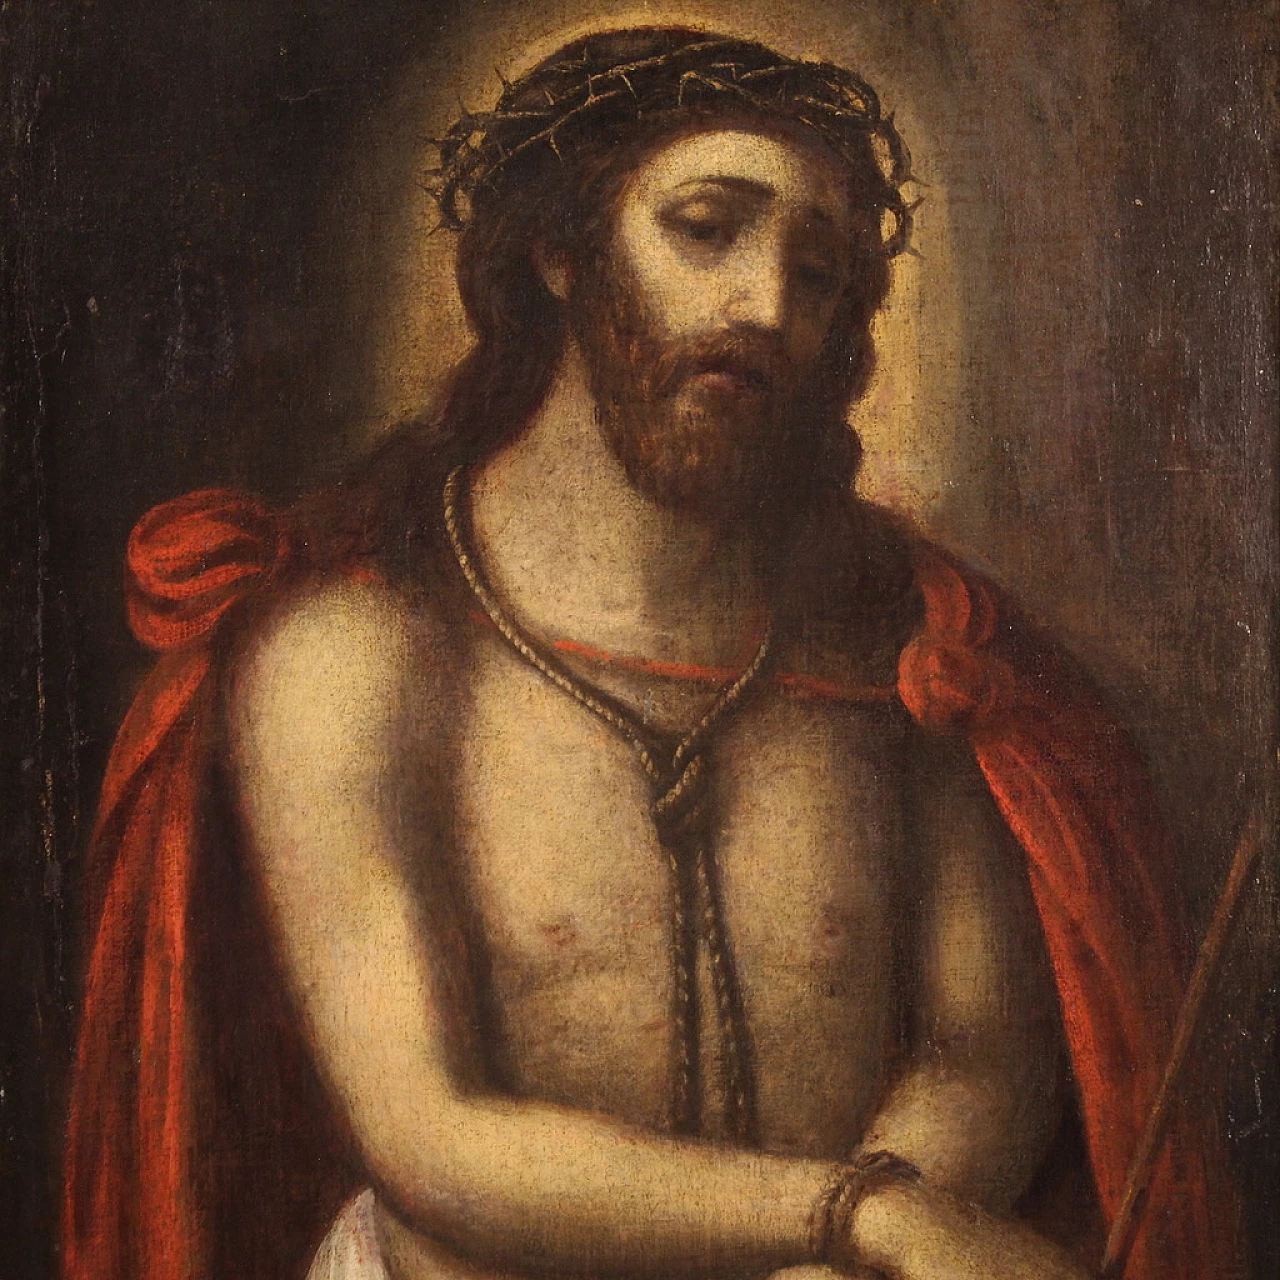 Ecce Homo painting, oil on canvas, 17th century 2